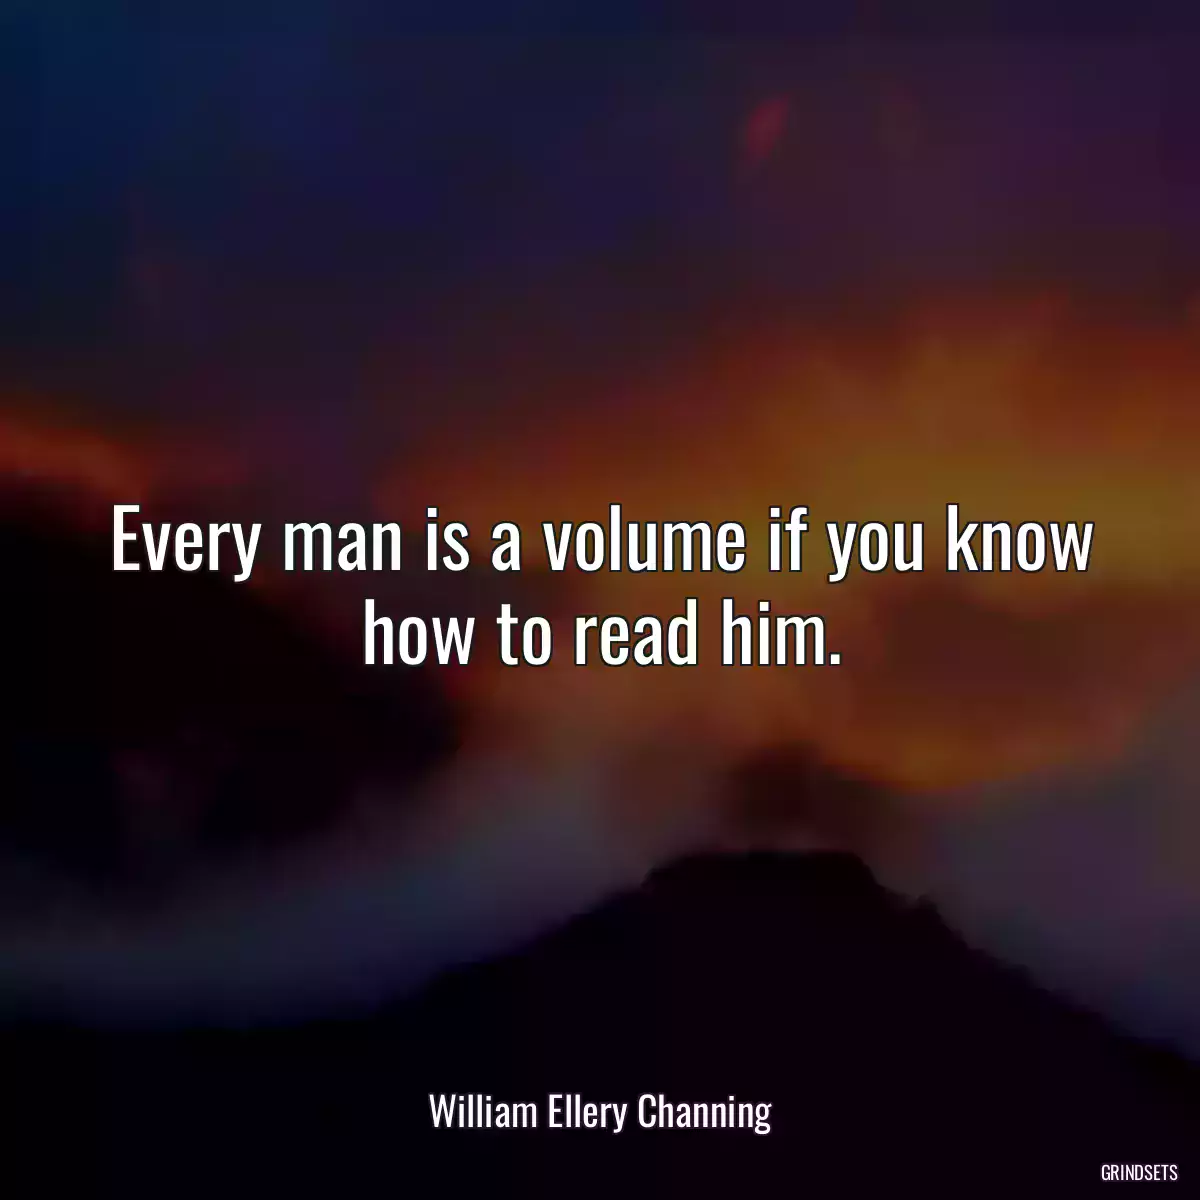 Every man is a volume if you know how to read him.